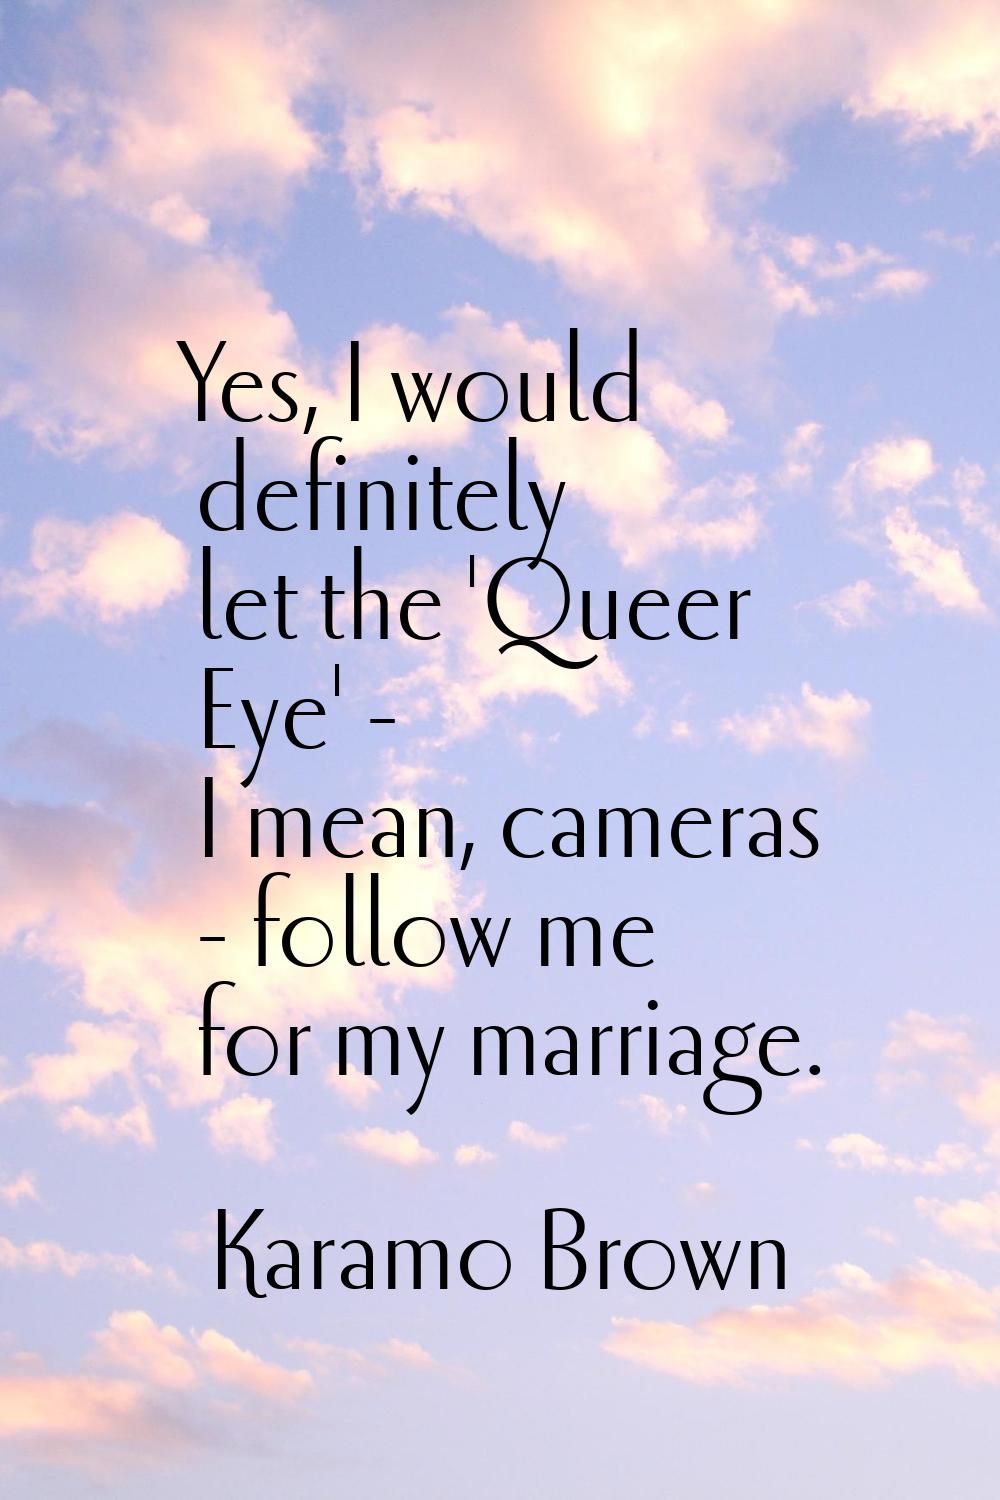 Yes, I would definitely let the 'Queer Eye' - I mean, cameras - follow me for my marriage.